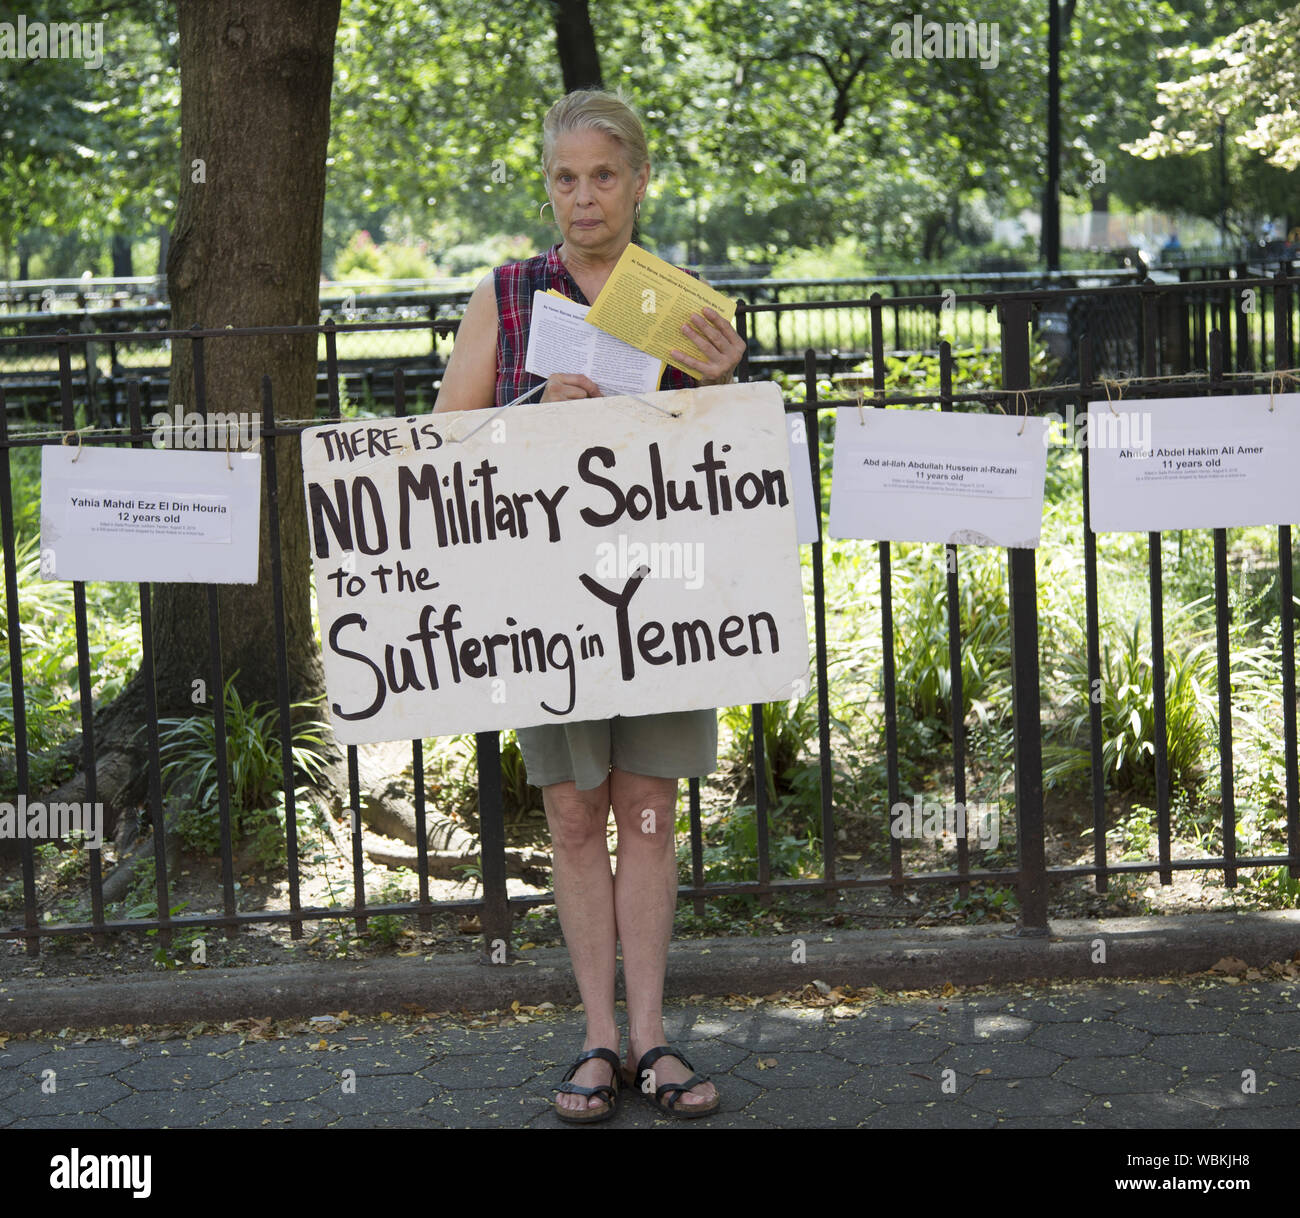 Members of 'The Catholic Workers' and other anti-war activists hold a vigil every Saturday in New York City to raise awareness of the terrible plight of the people of Yemen due to the bombings from Saudi Arabia backed by the US military. Stock Photo